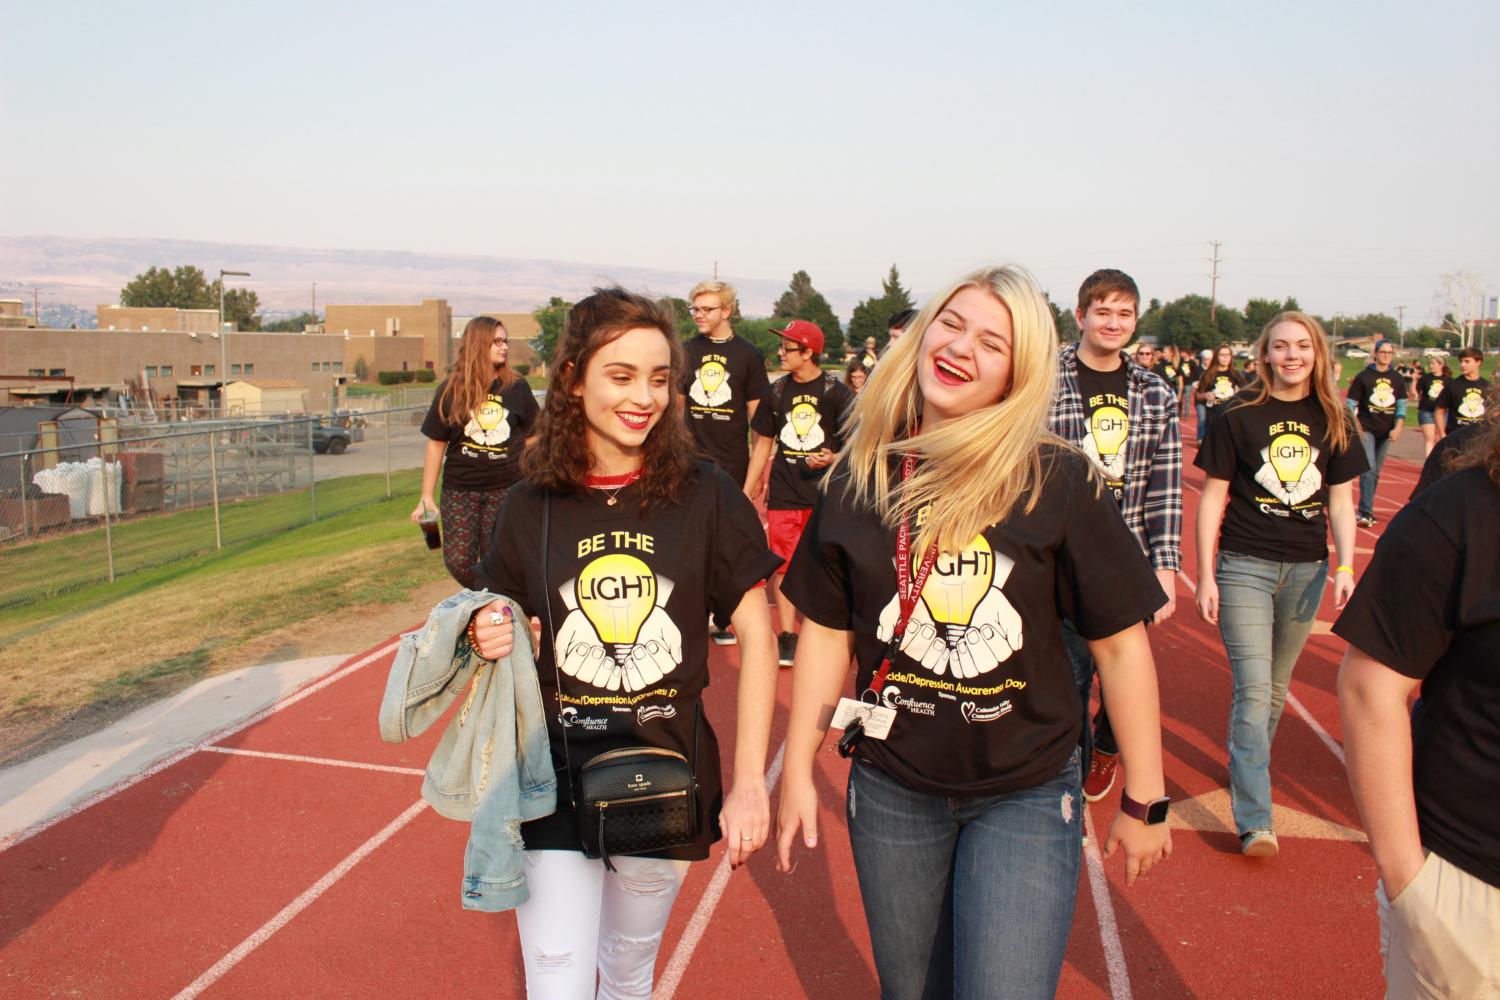 Juniors Hannah Moore and Karissa Long walk to support the Be the Light movement.